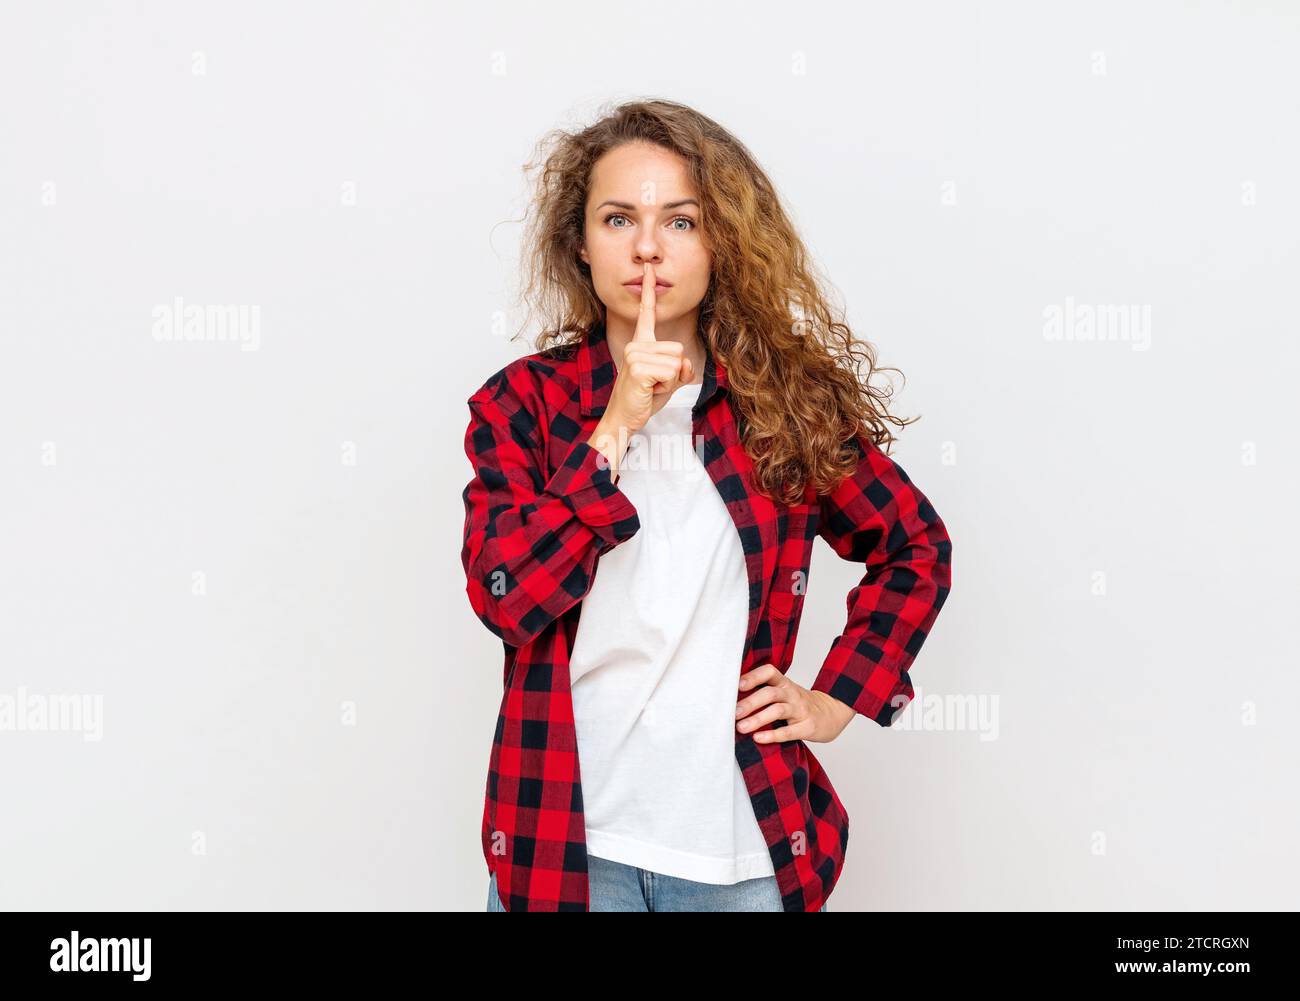 Curly hair woman shushing in front of white background. Stock Photo